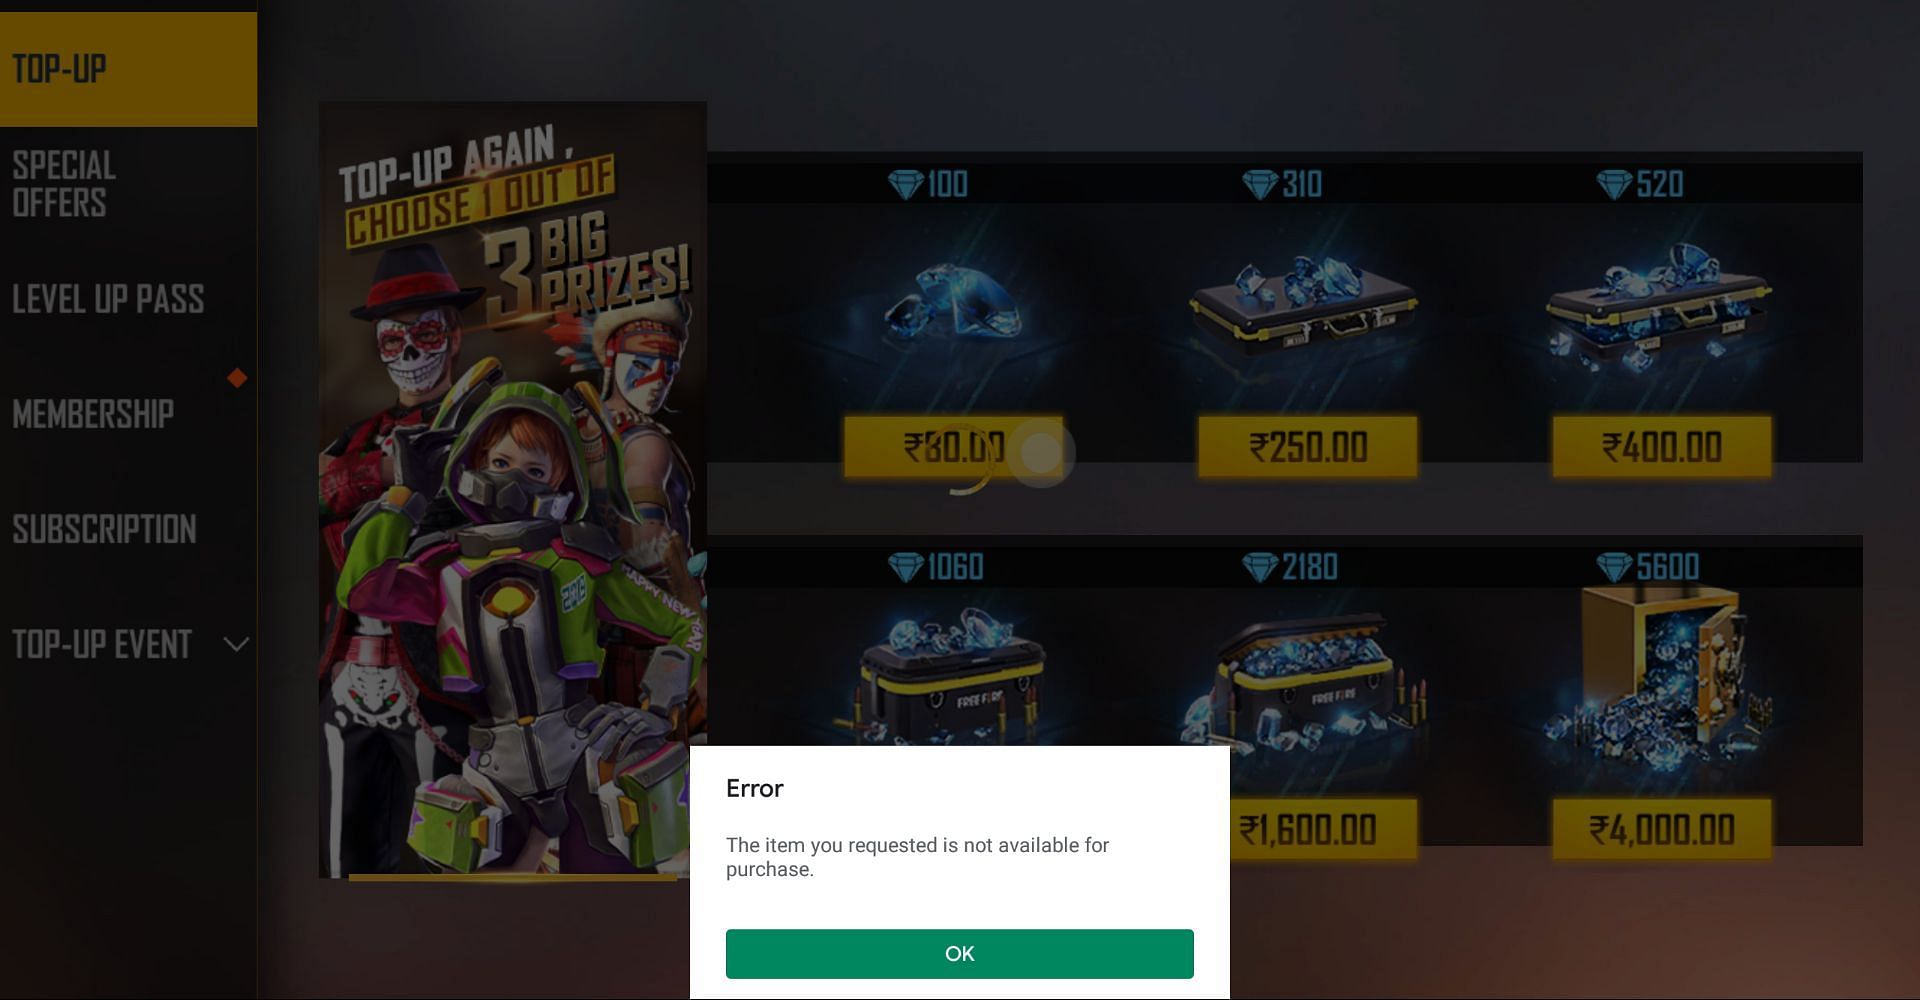 The users also cannot perform in-game purchases (Image via Garena)